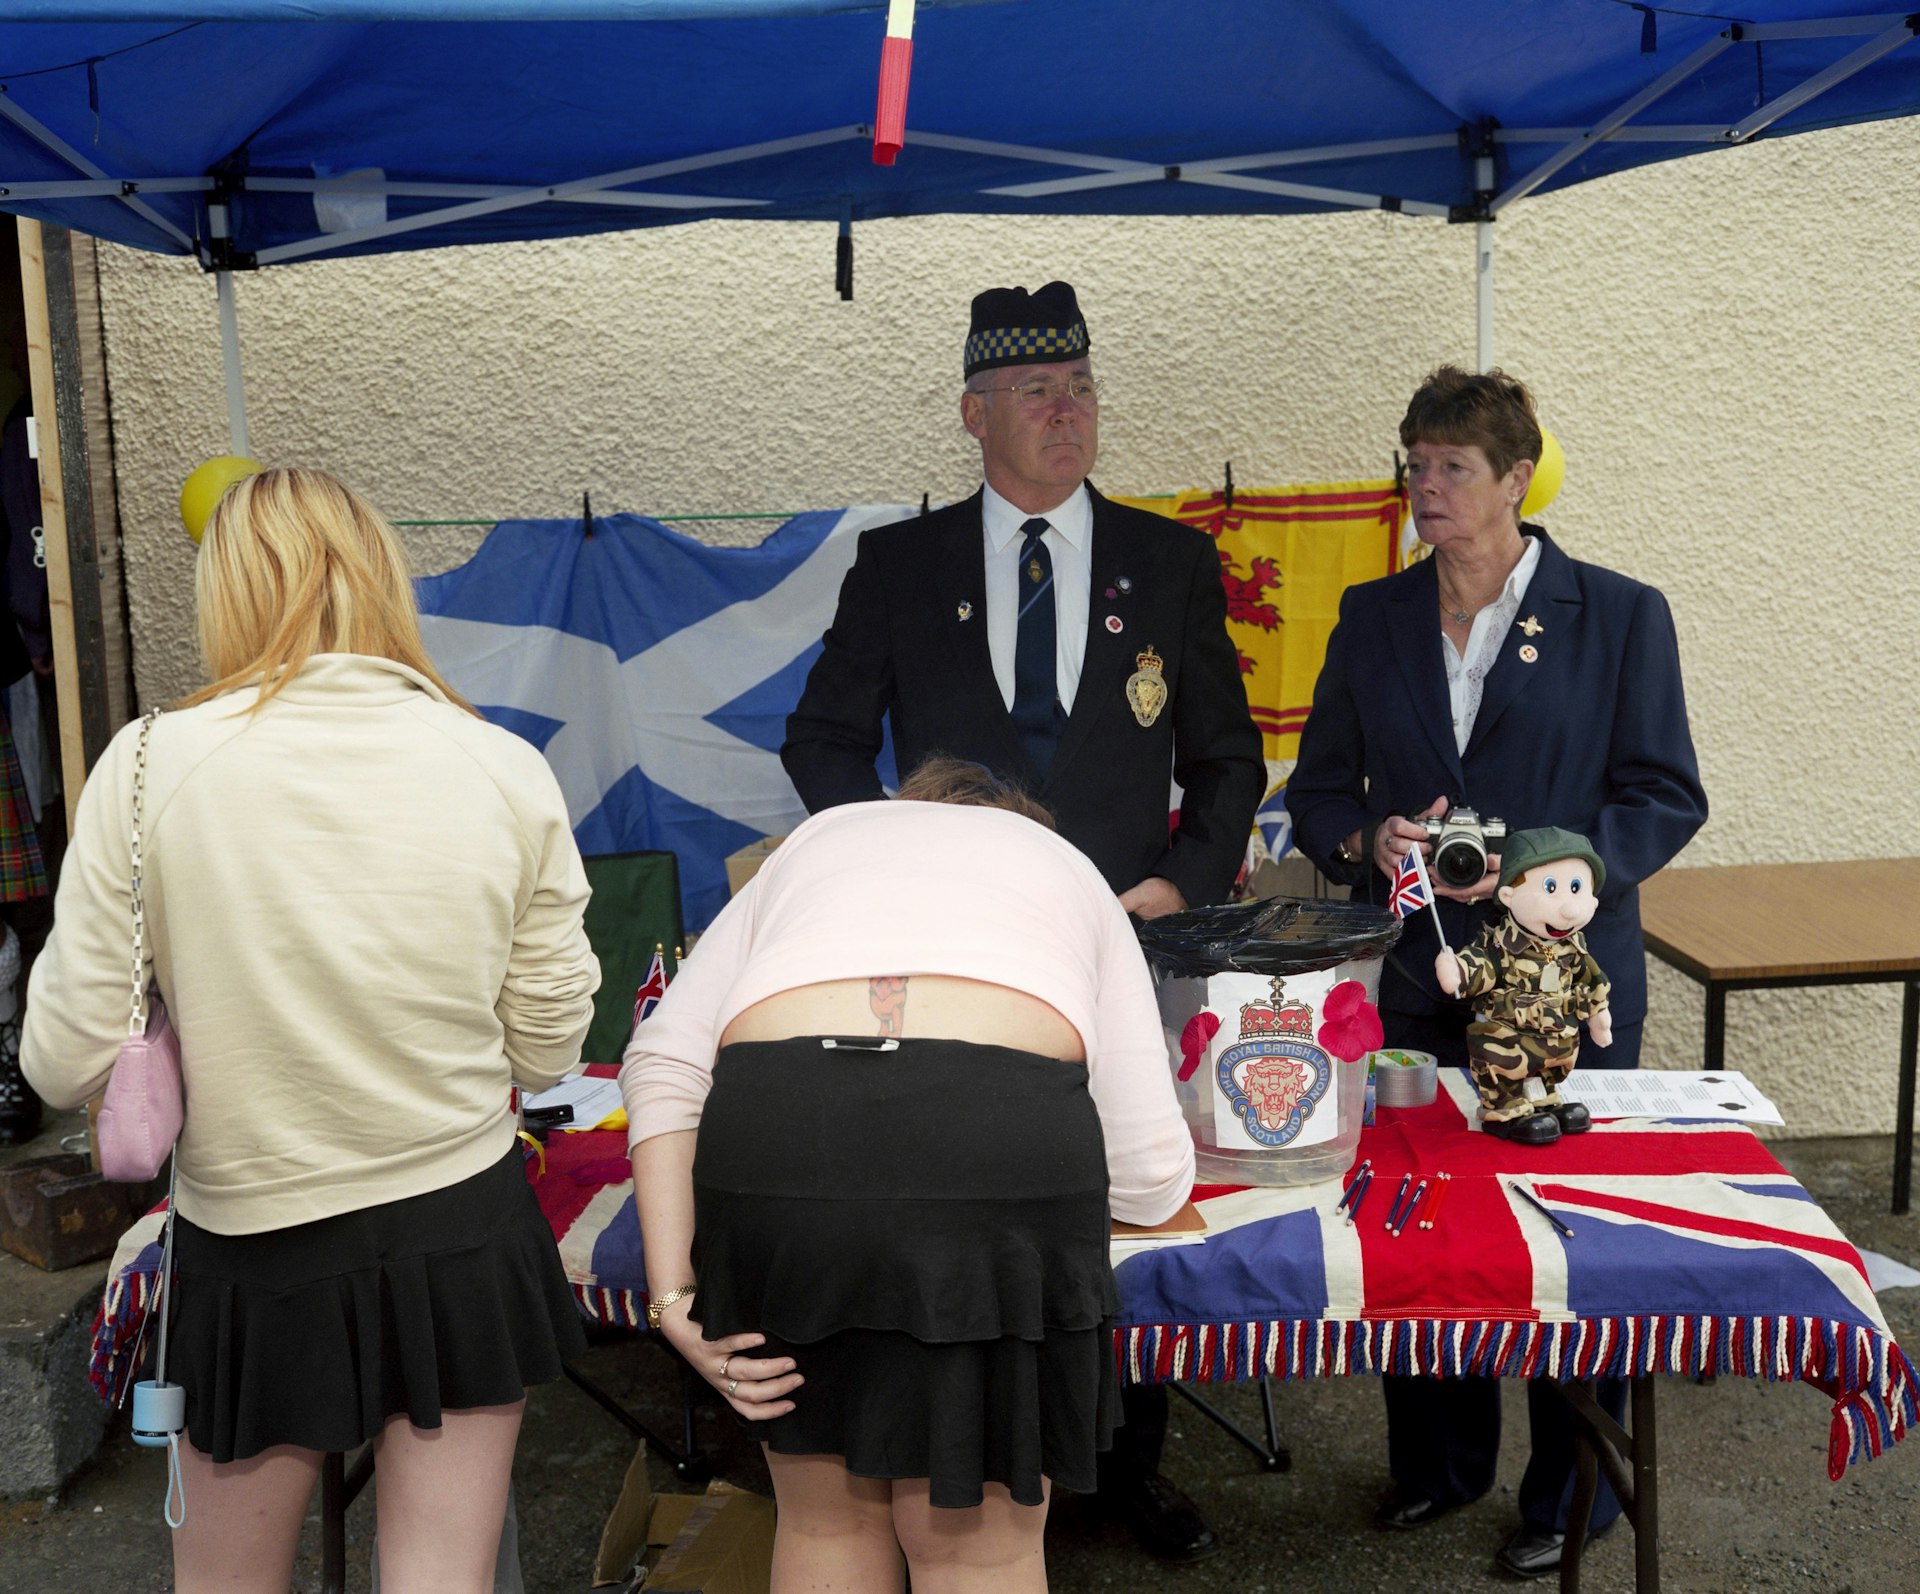 GB. Scotland. Dunoon. Cowal Games. From A8. 2004. © Martin Parr/Magnum Photos